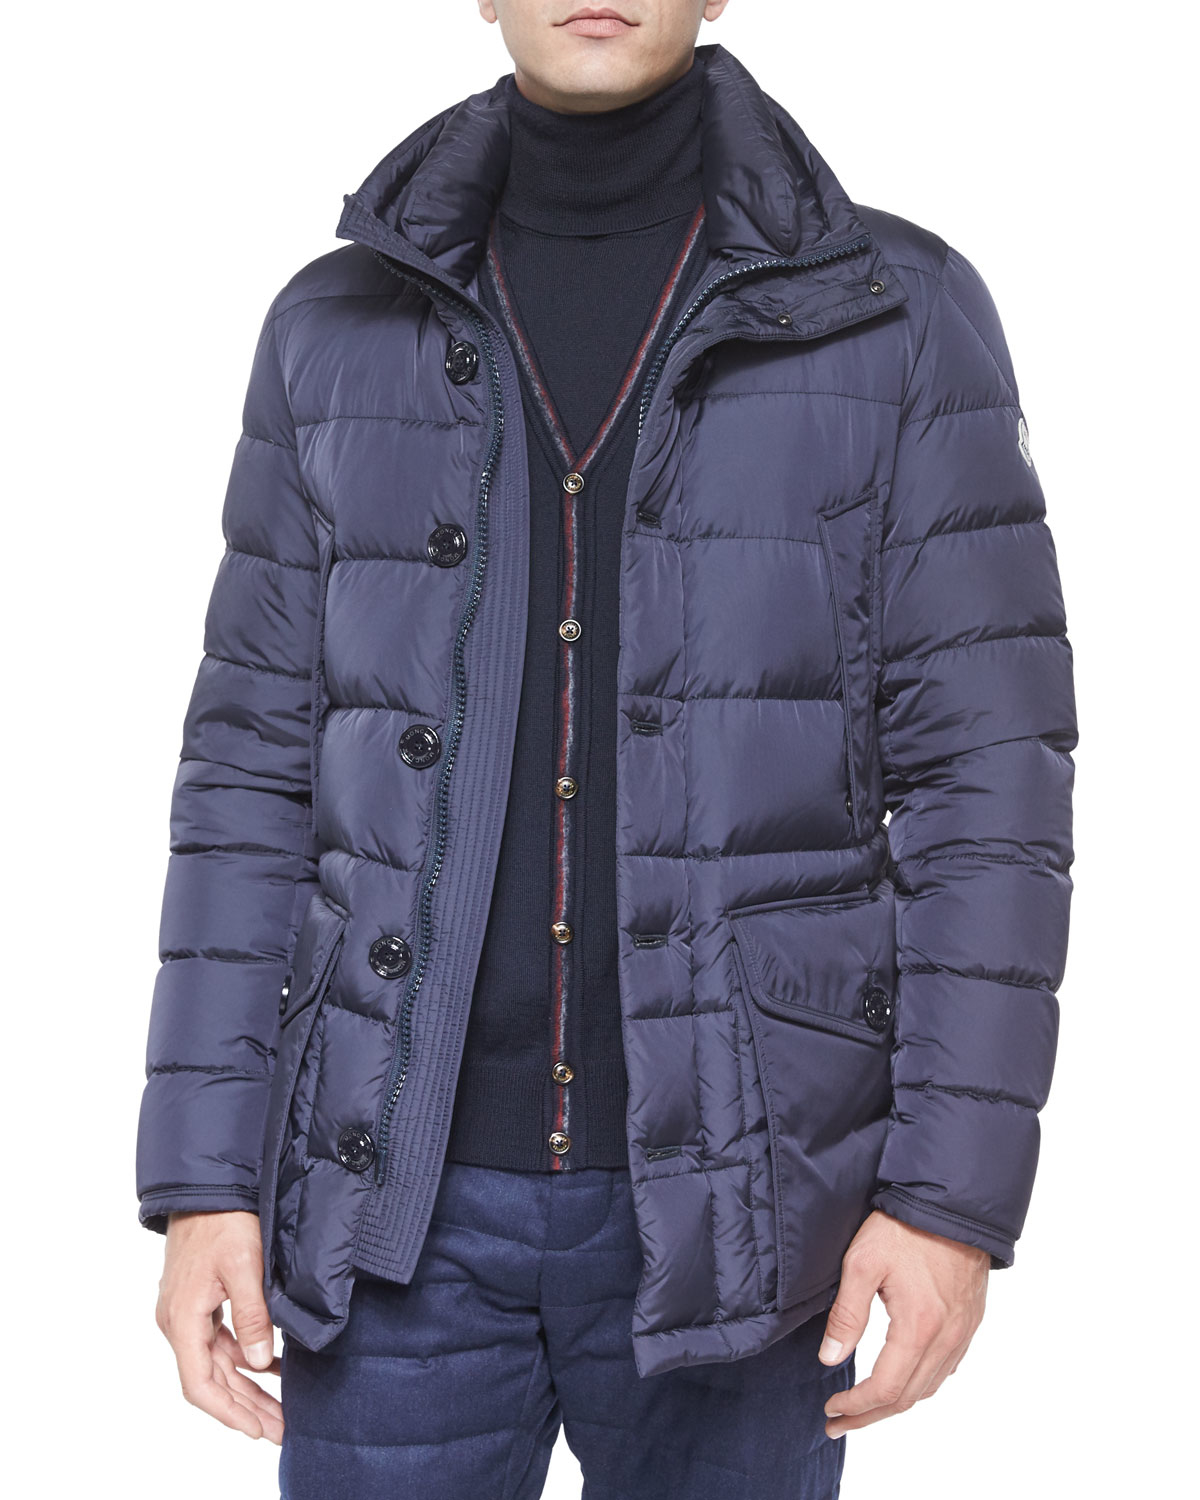 moncler cluny review Cheaper Than Retail Price> Buy Clothing, Accessories  and lifestyle products for women & men -